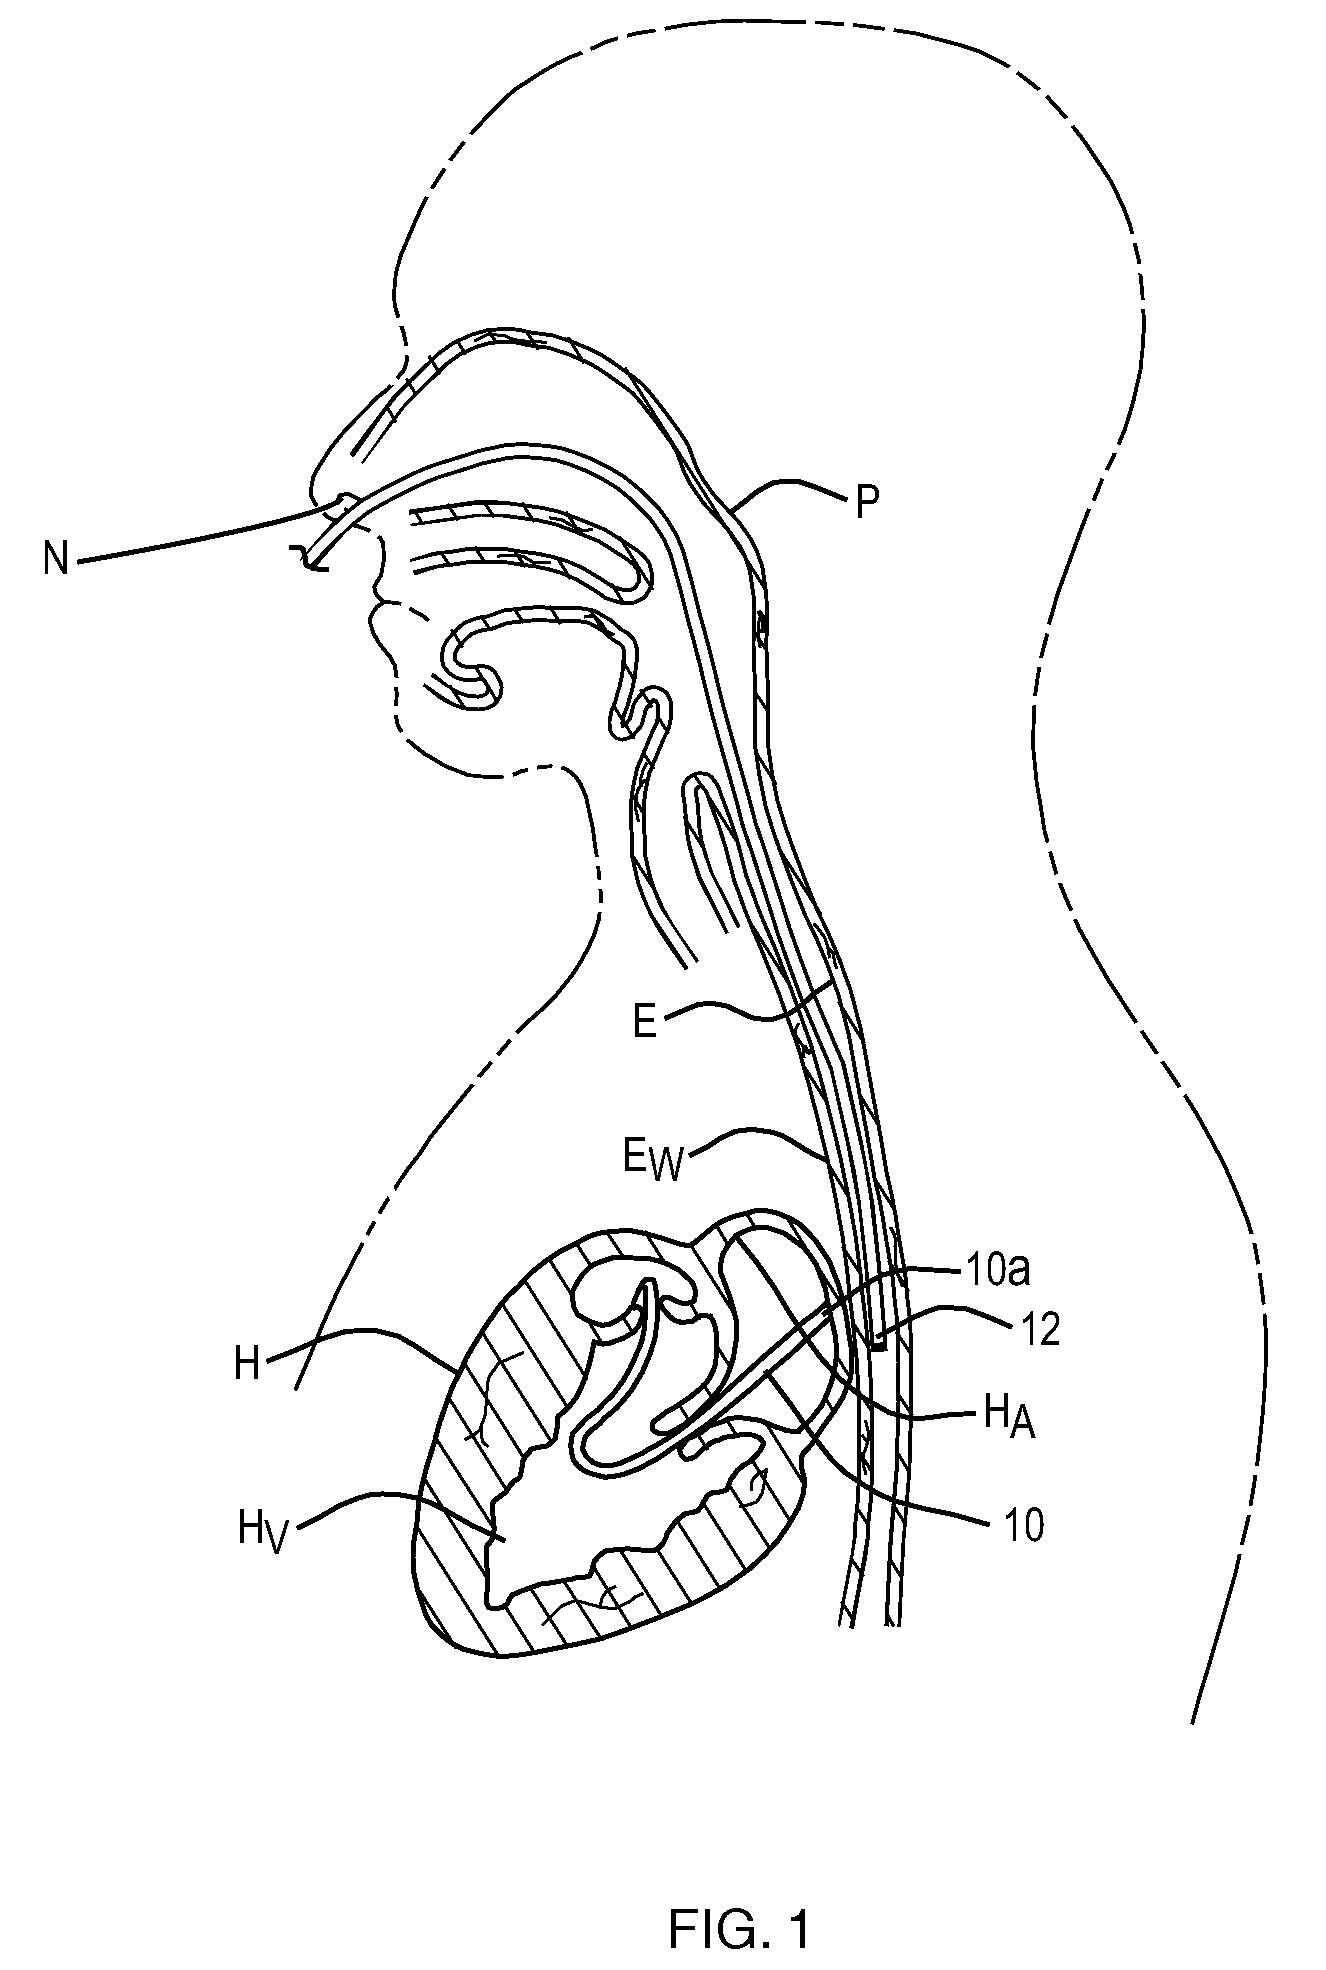 Method and apparatus for aligning an ablation catheter and a temperature probe during an ablation procedure